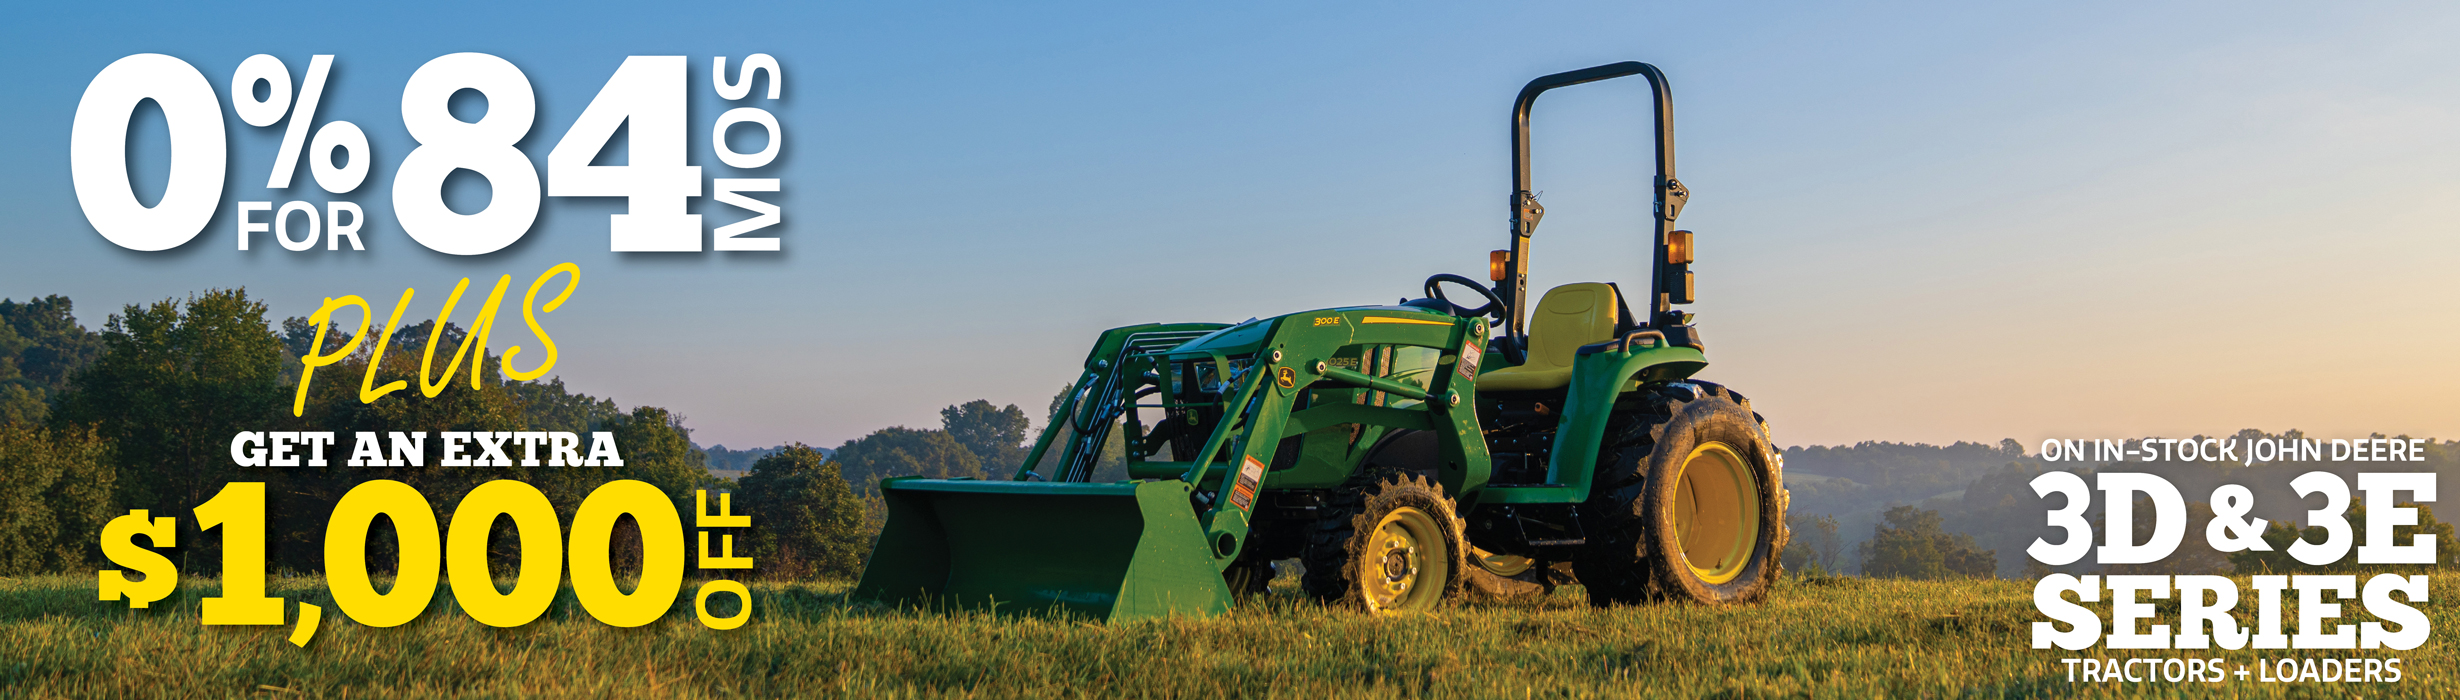 Get 0% for 48 mos PLUS an EXTRA $1,000 off 3D & E Tractors!